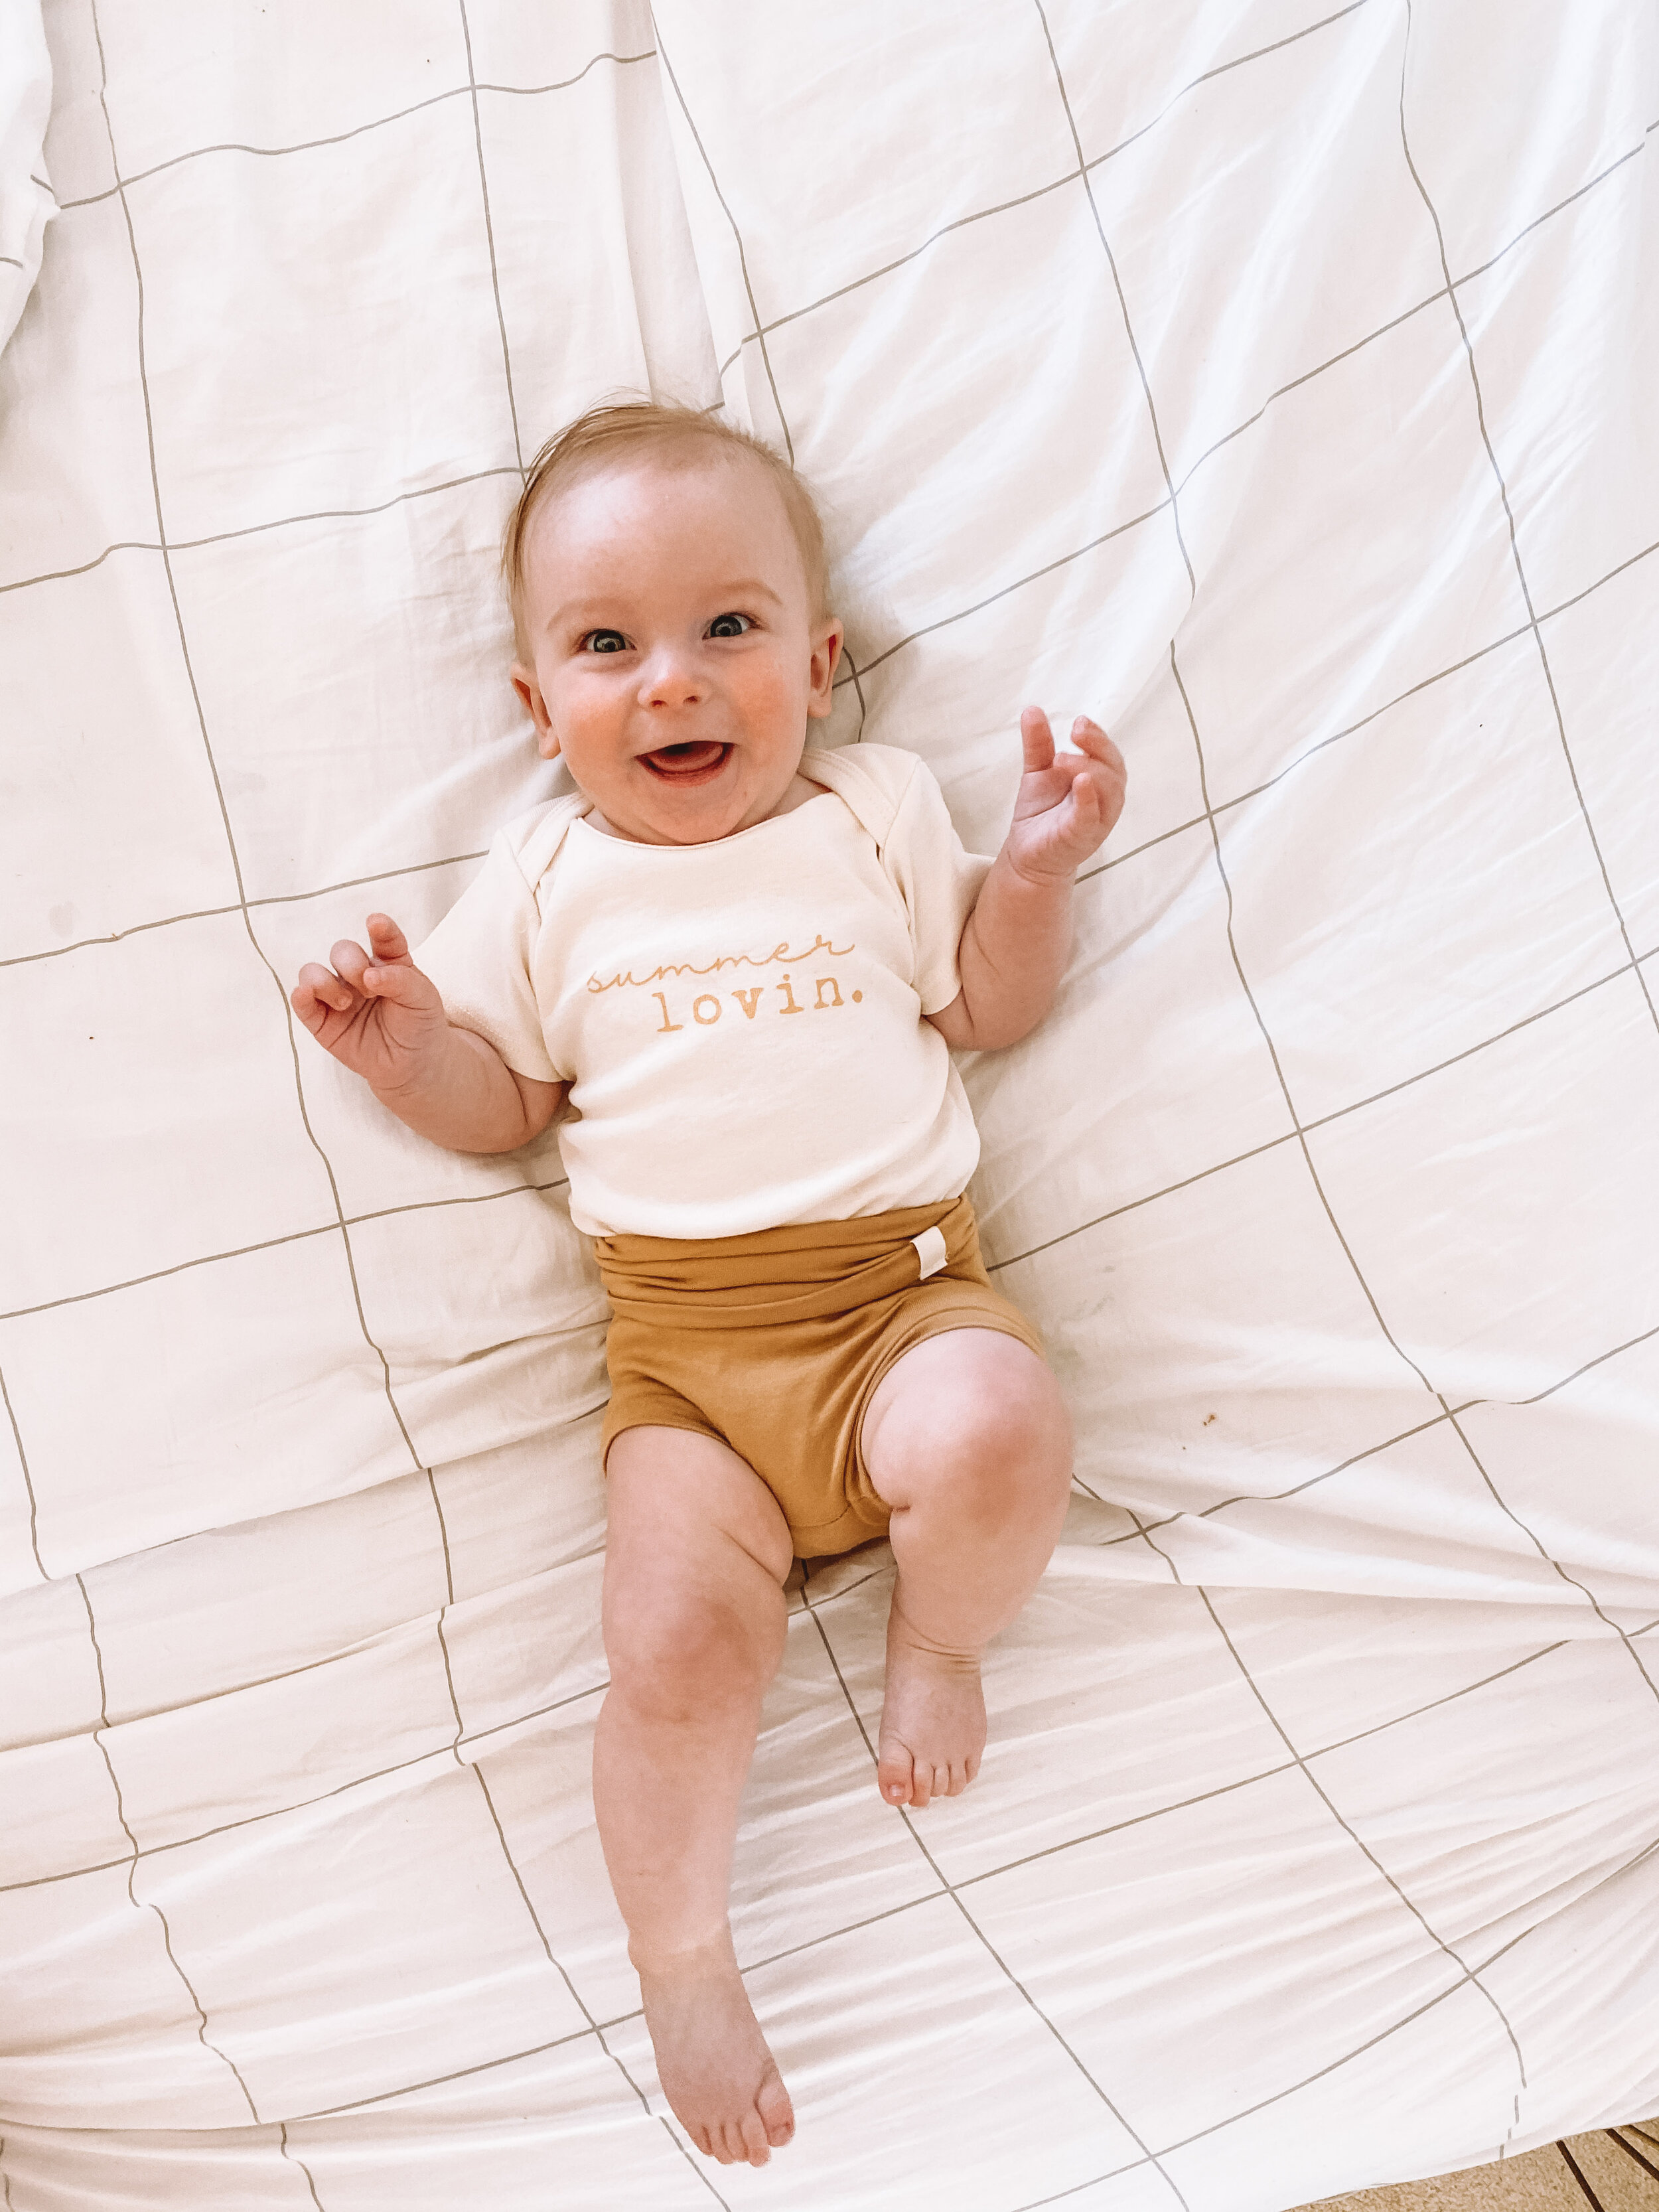 Tenth and Pine Summer Collection - Discount Code: JENNH10 - Cute Organic Baby Onesies